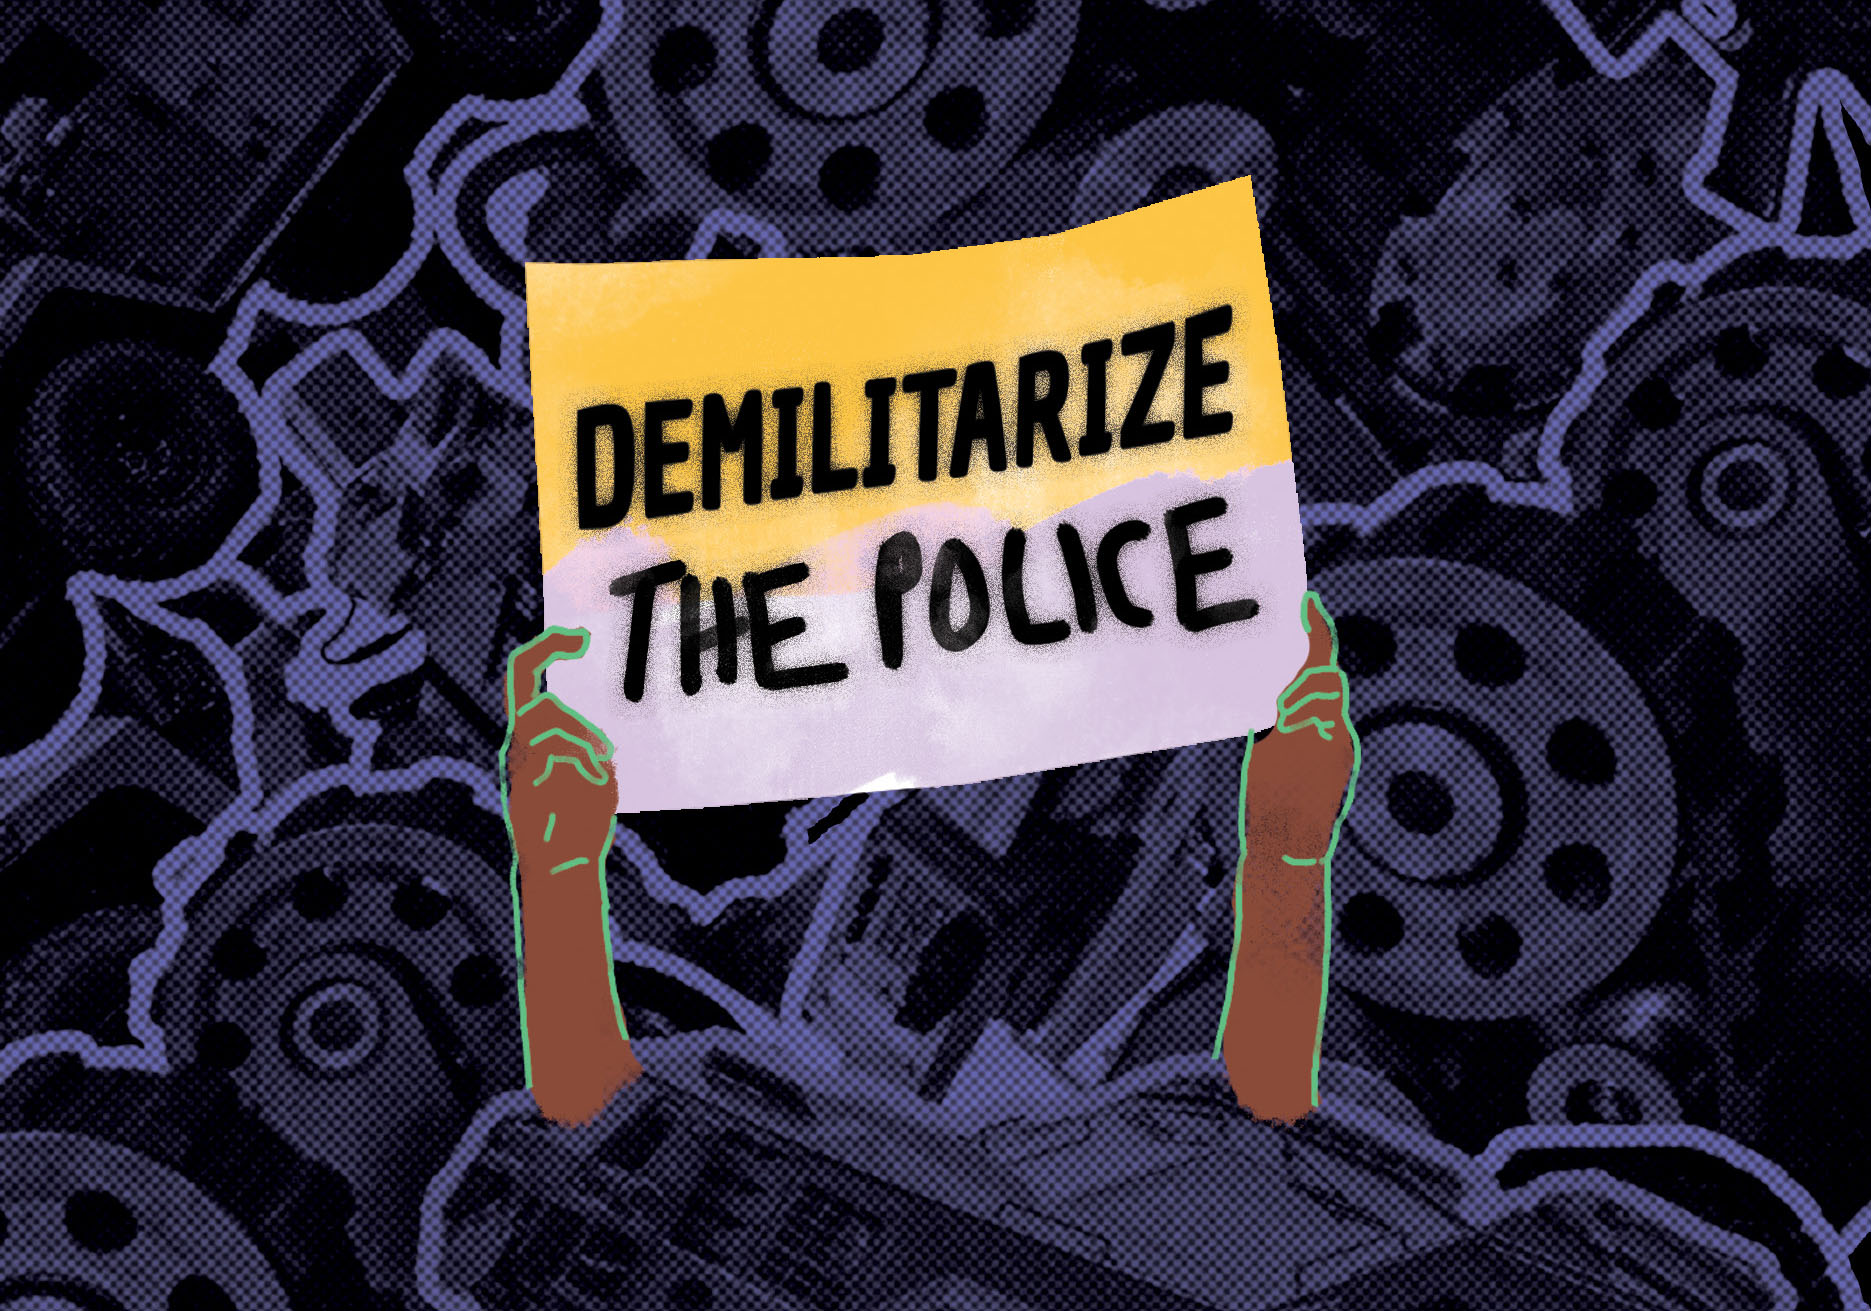 5 Ways to engage with AFSC on Police Demilitarization